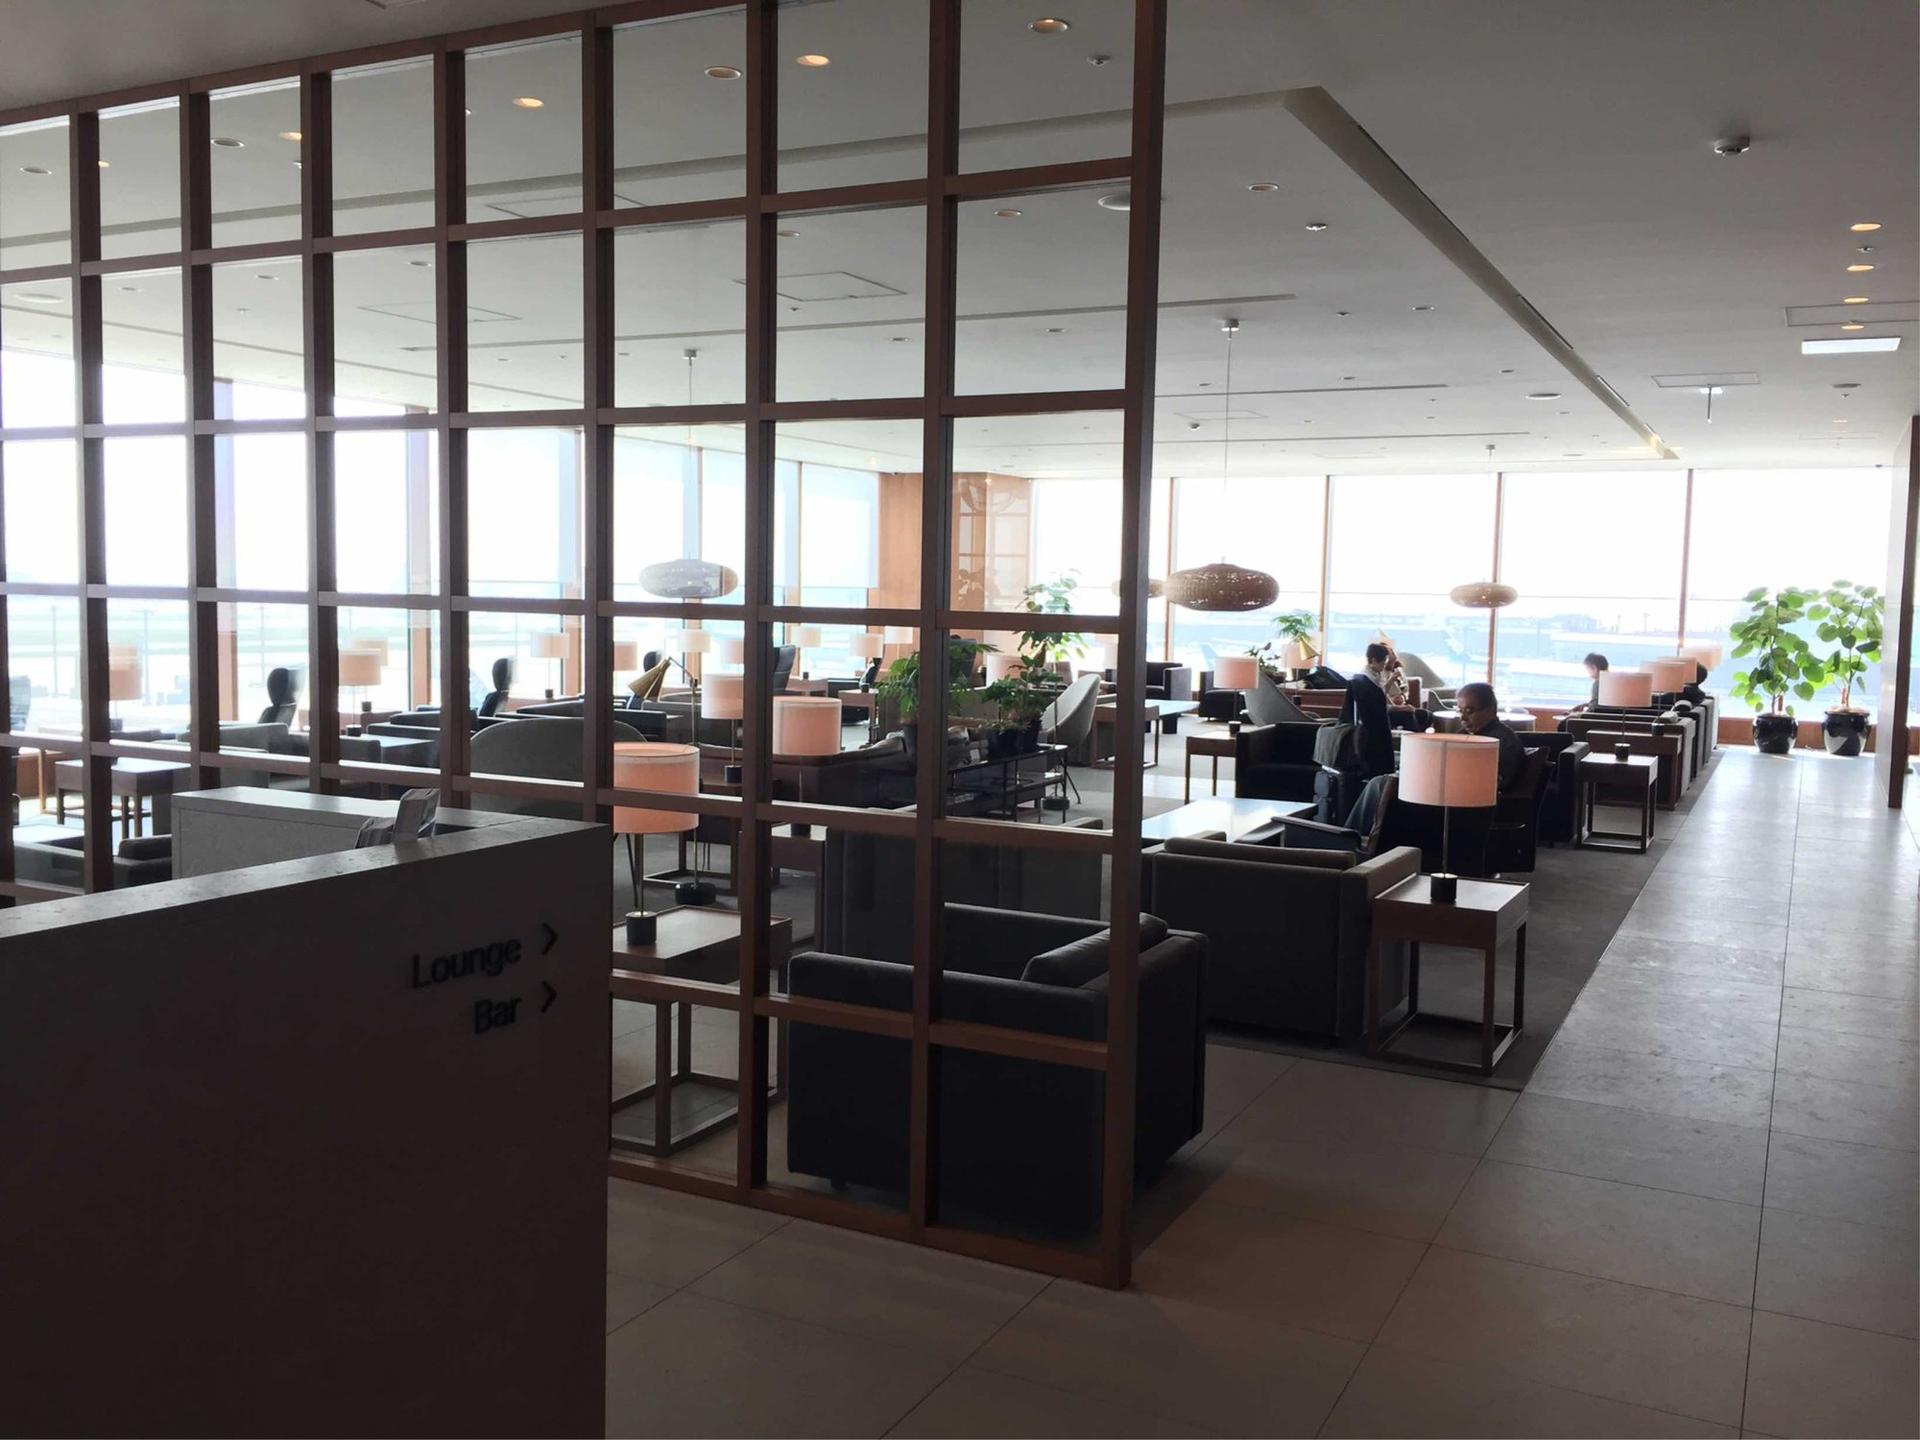 Cathay Pacific Lounge image 40 of 49